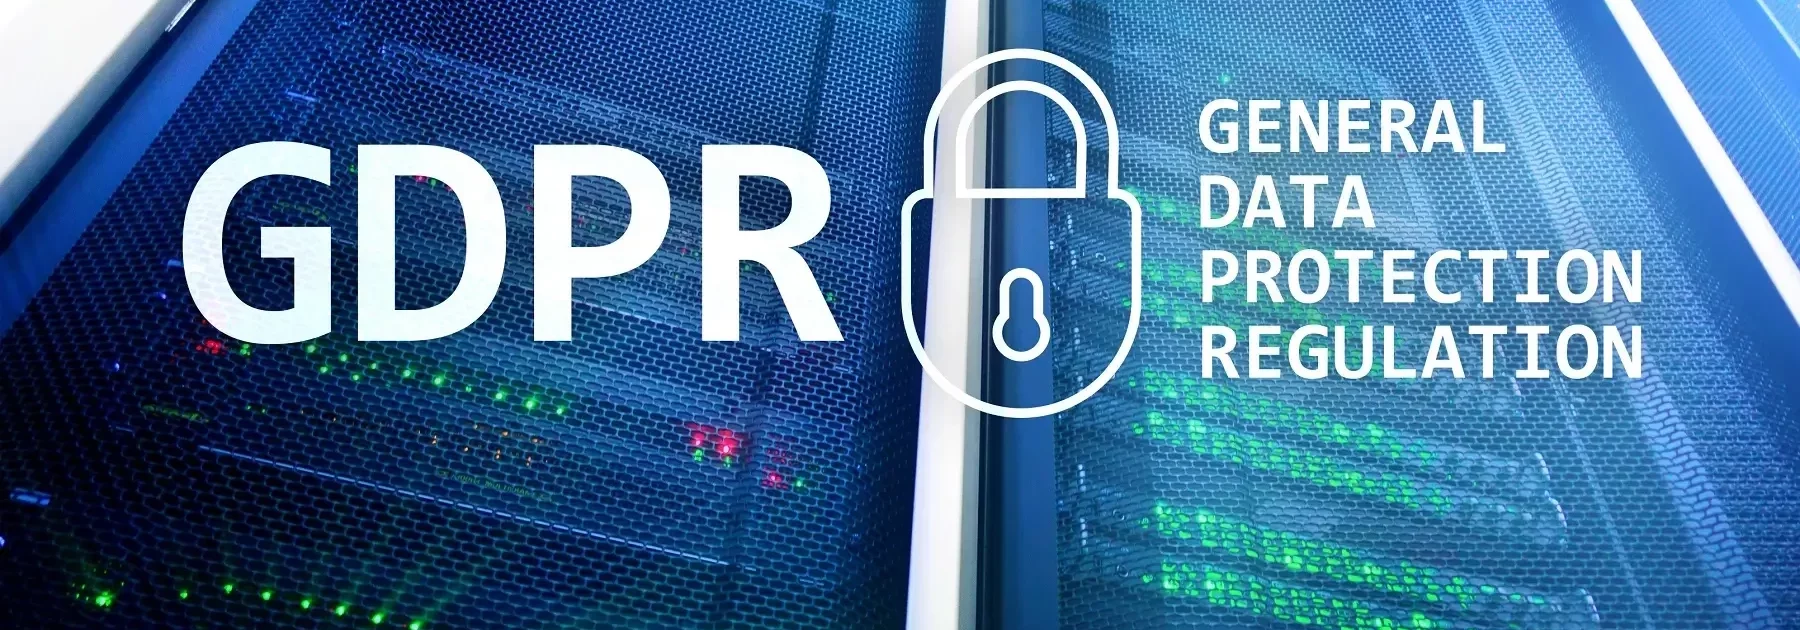 GDPR, General data protection regulation compliance | TJC Group